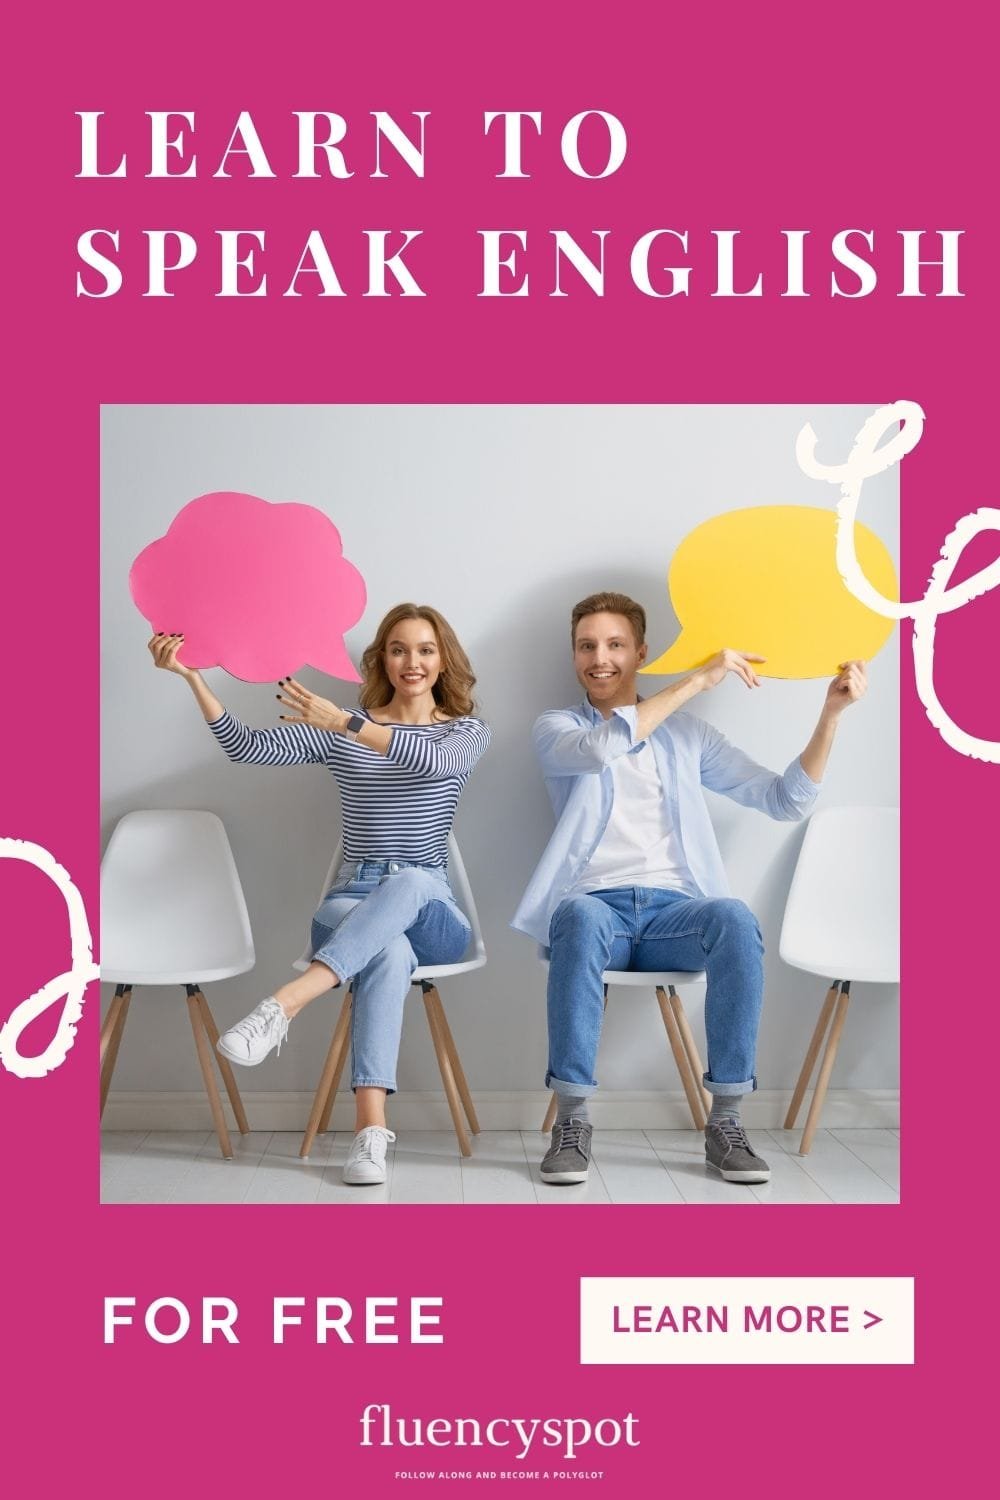 How to learn to speak English for free